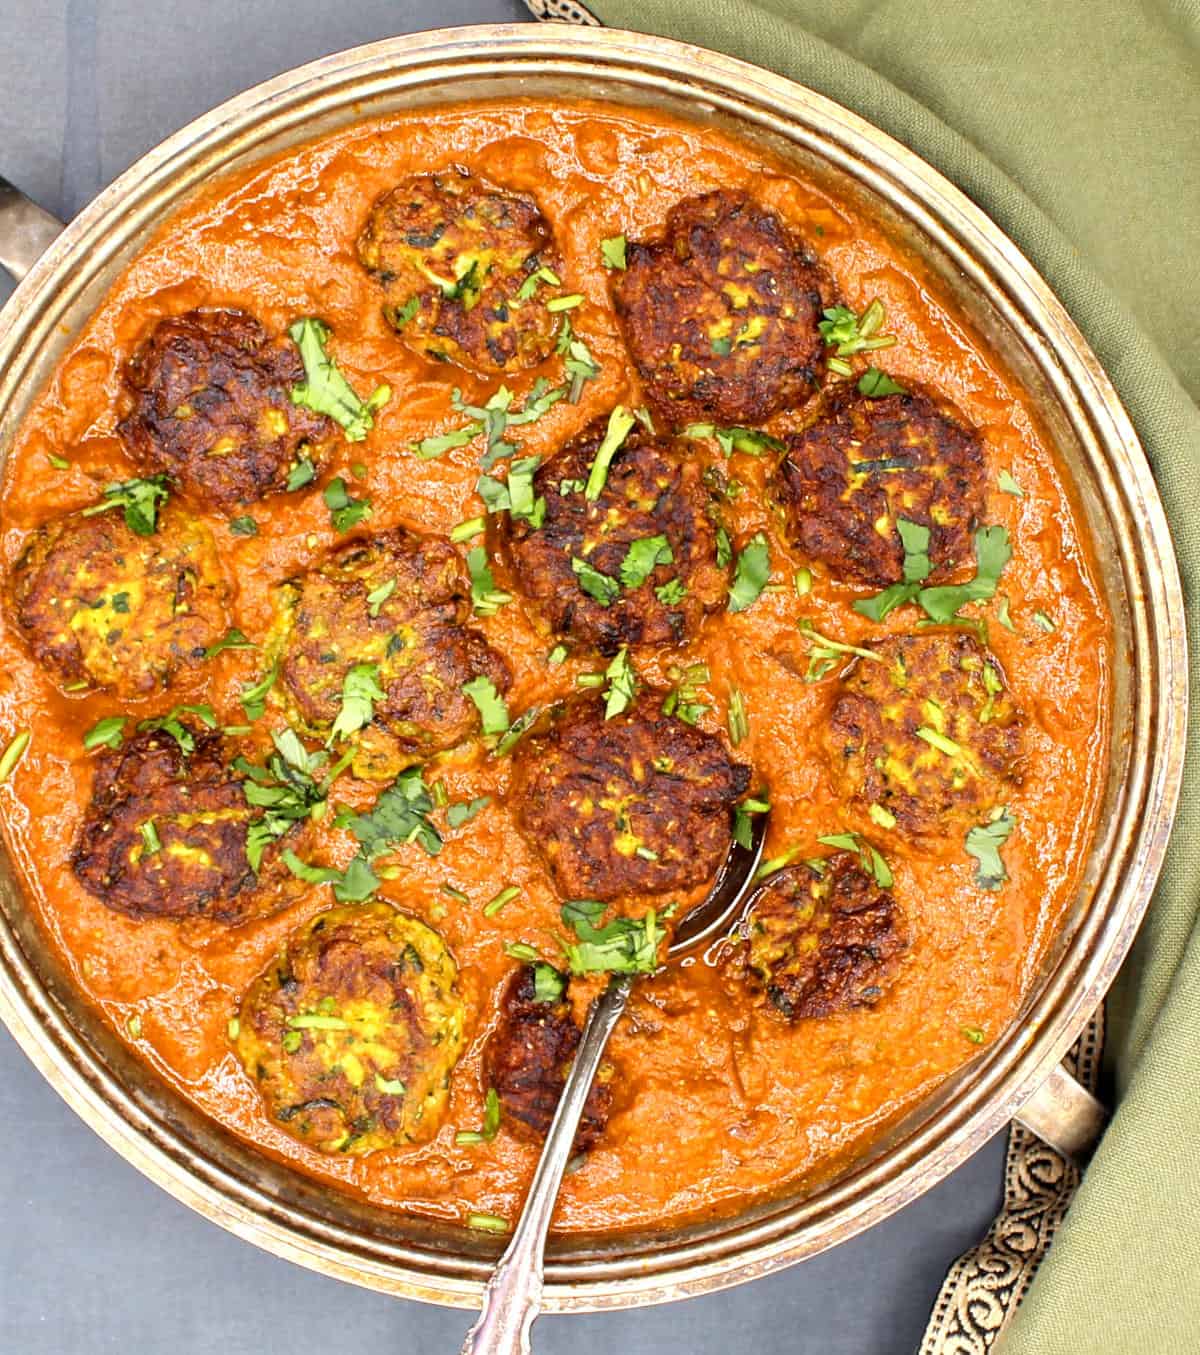 Overhead closeup of zucchini kofta curry--kofta balls in a spicy orange sauce in a silver serving dish with a spoon and green napkin.